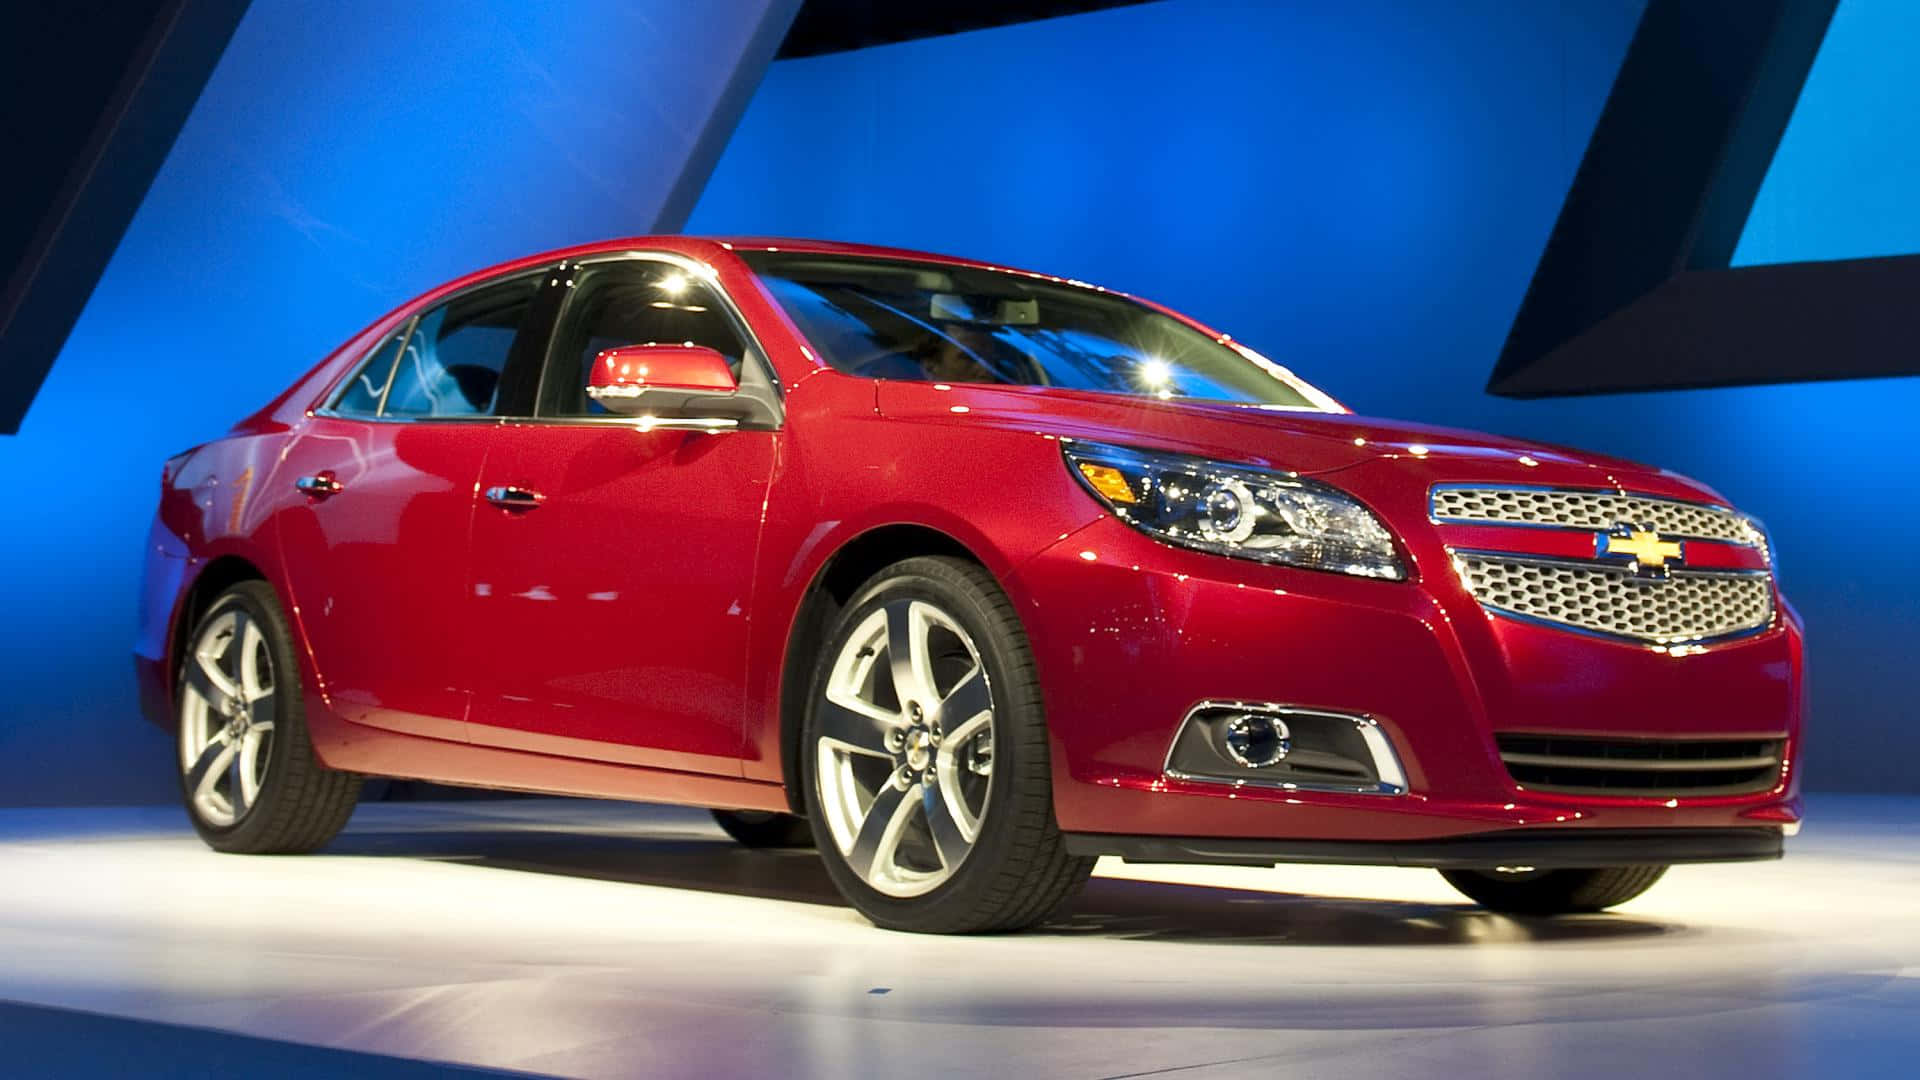 A Red Chevrolet Malibu Is On Display At An Auto Show Wallpaper